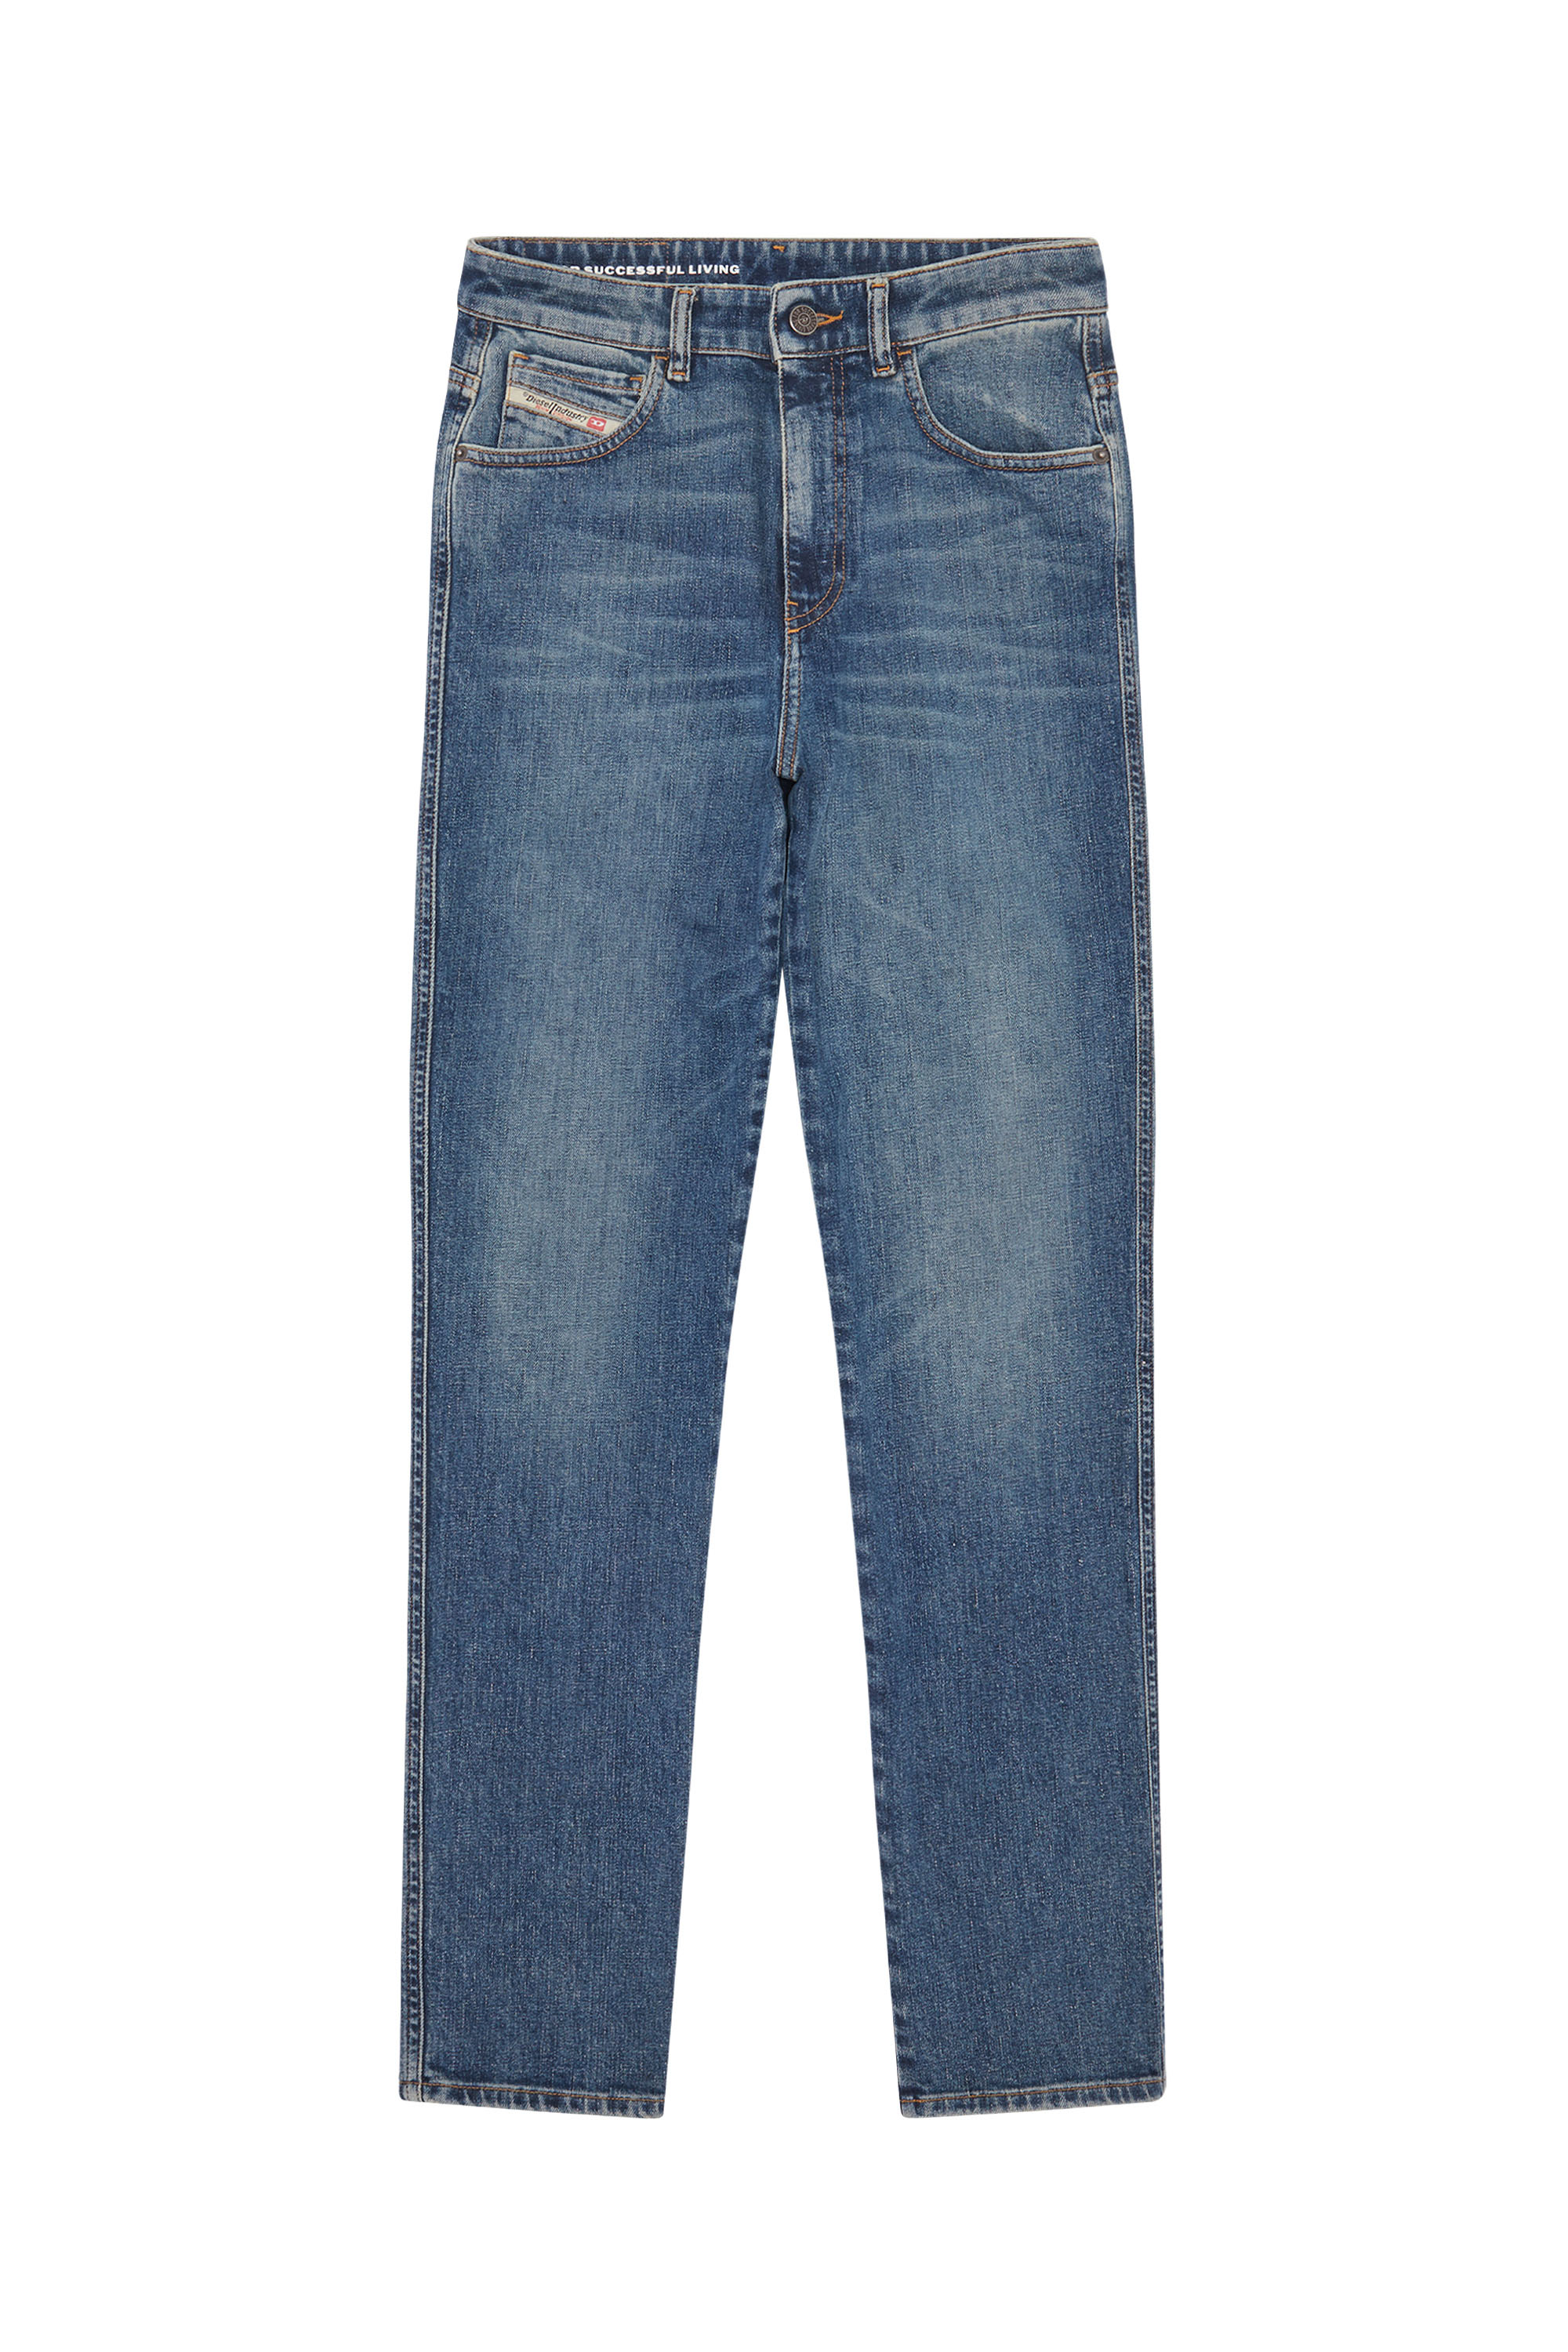 Diesel - 1994 09E72 Straight Jeans,  - Image 6